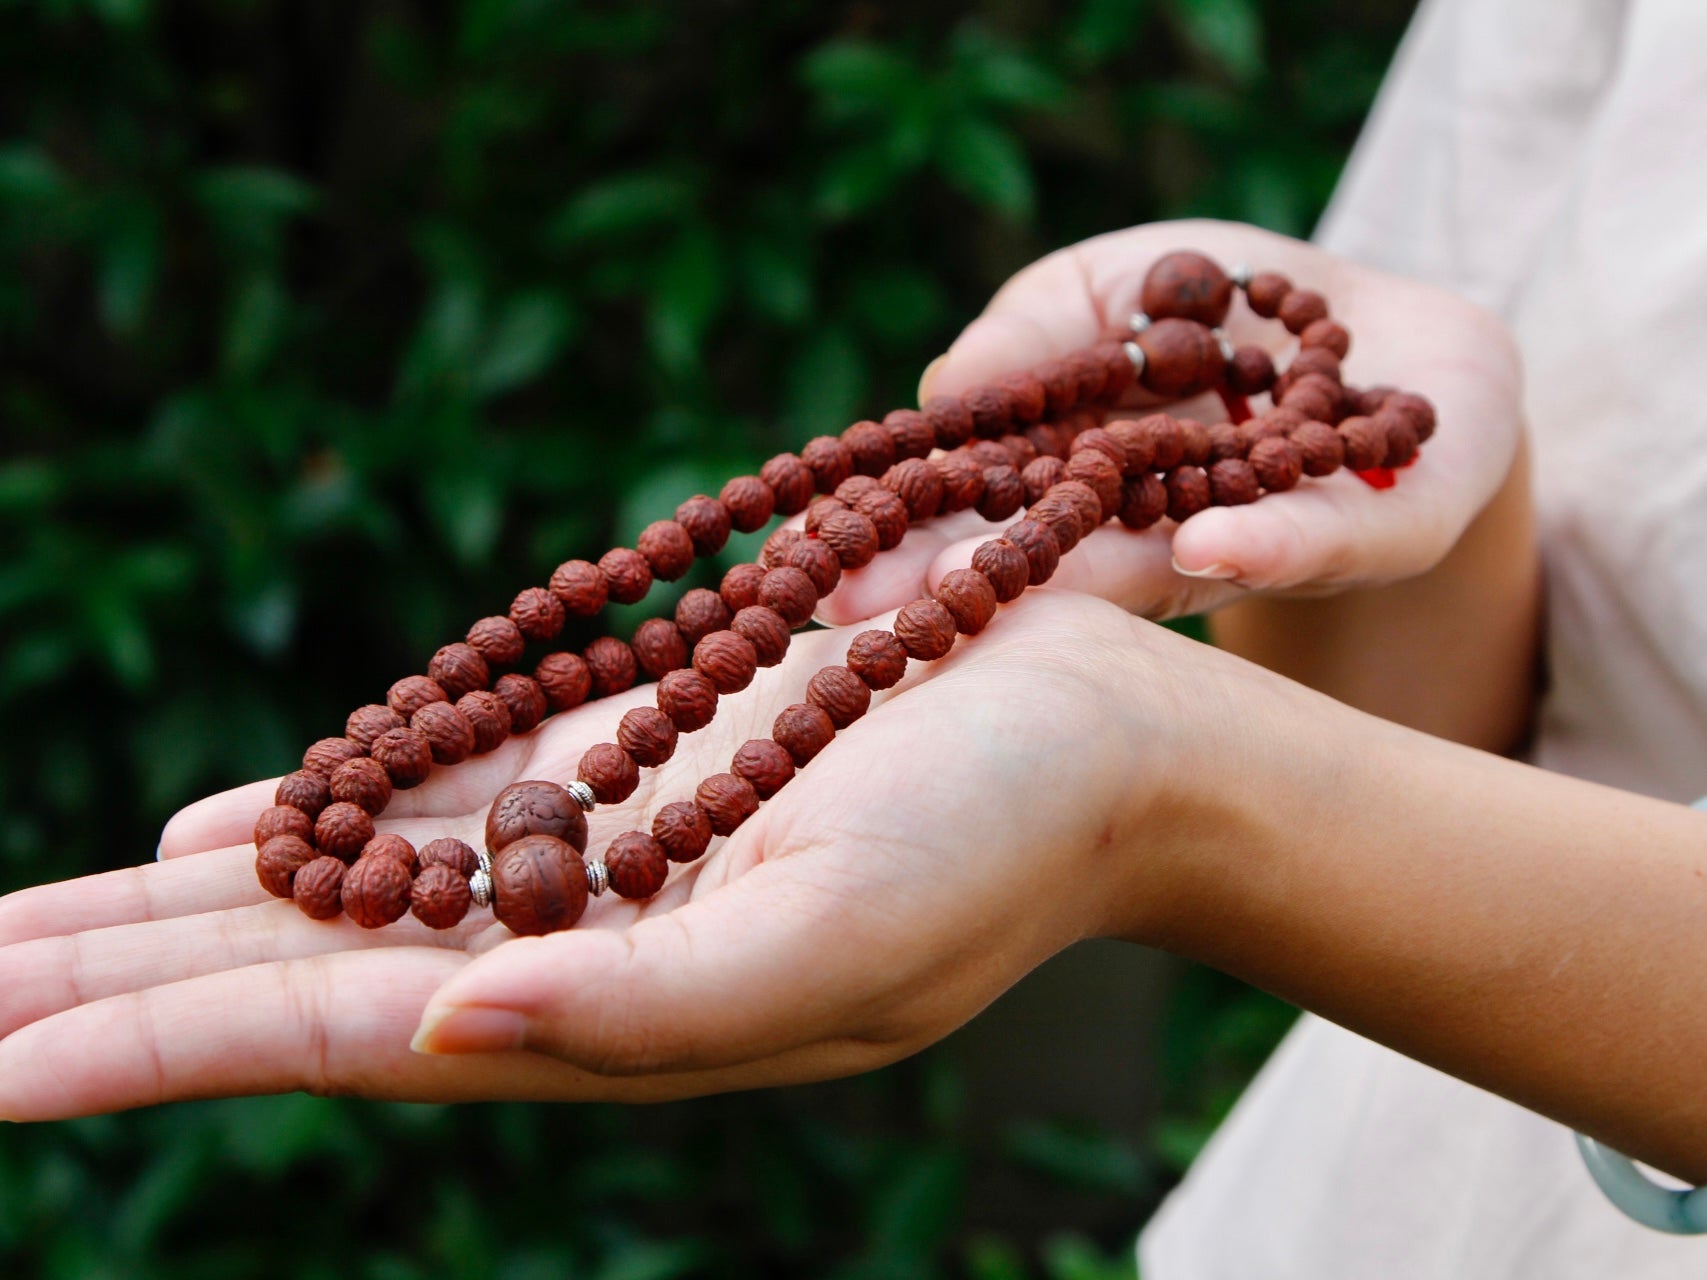 Rakhtu seed mala stretched out in 2 hands